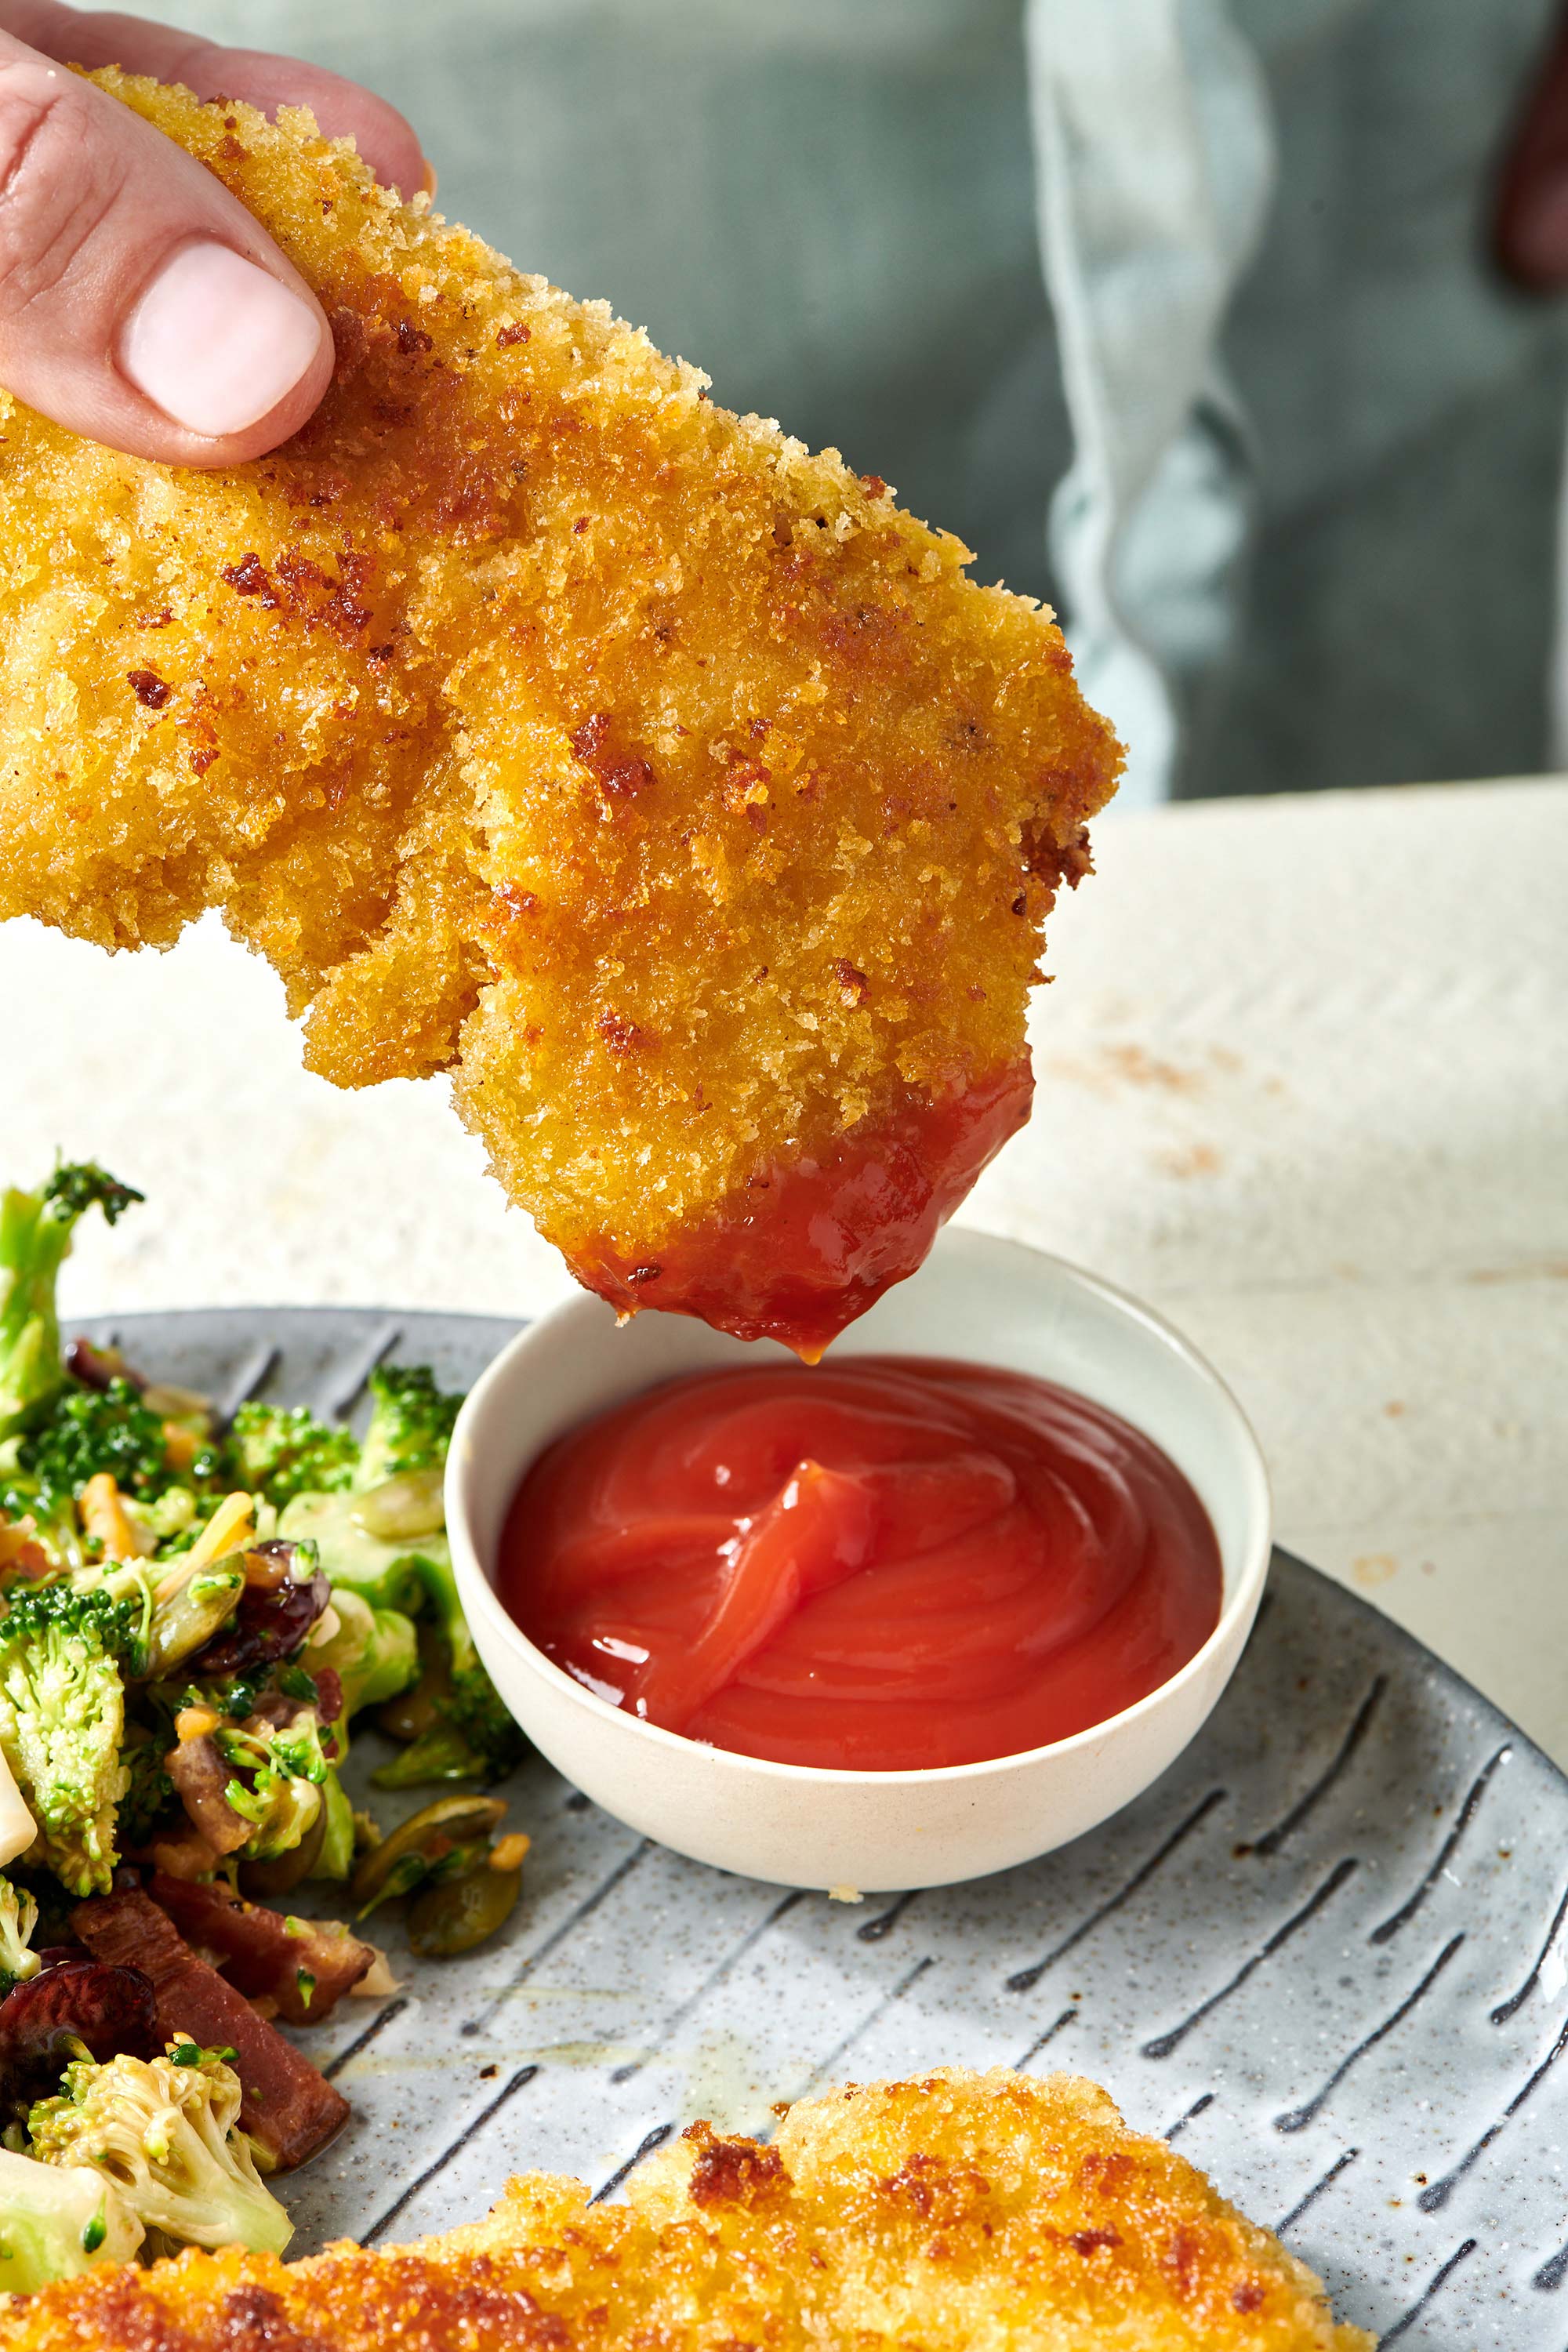 Dipping breaded chicken tender into small bowl of ketchup.